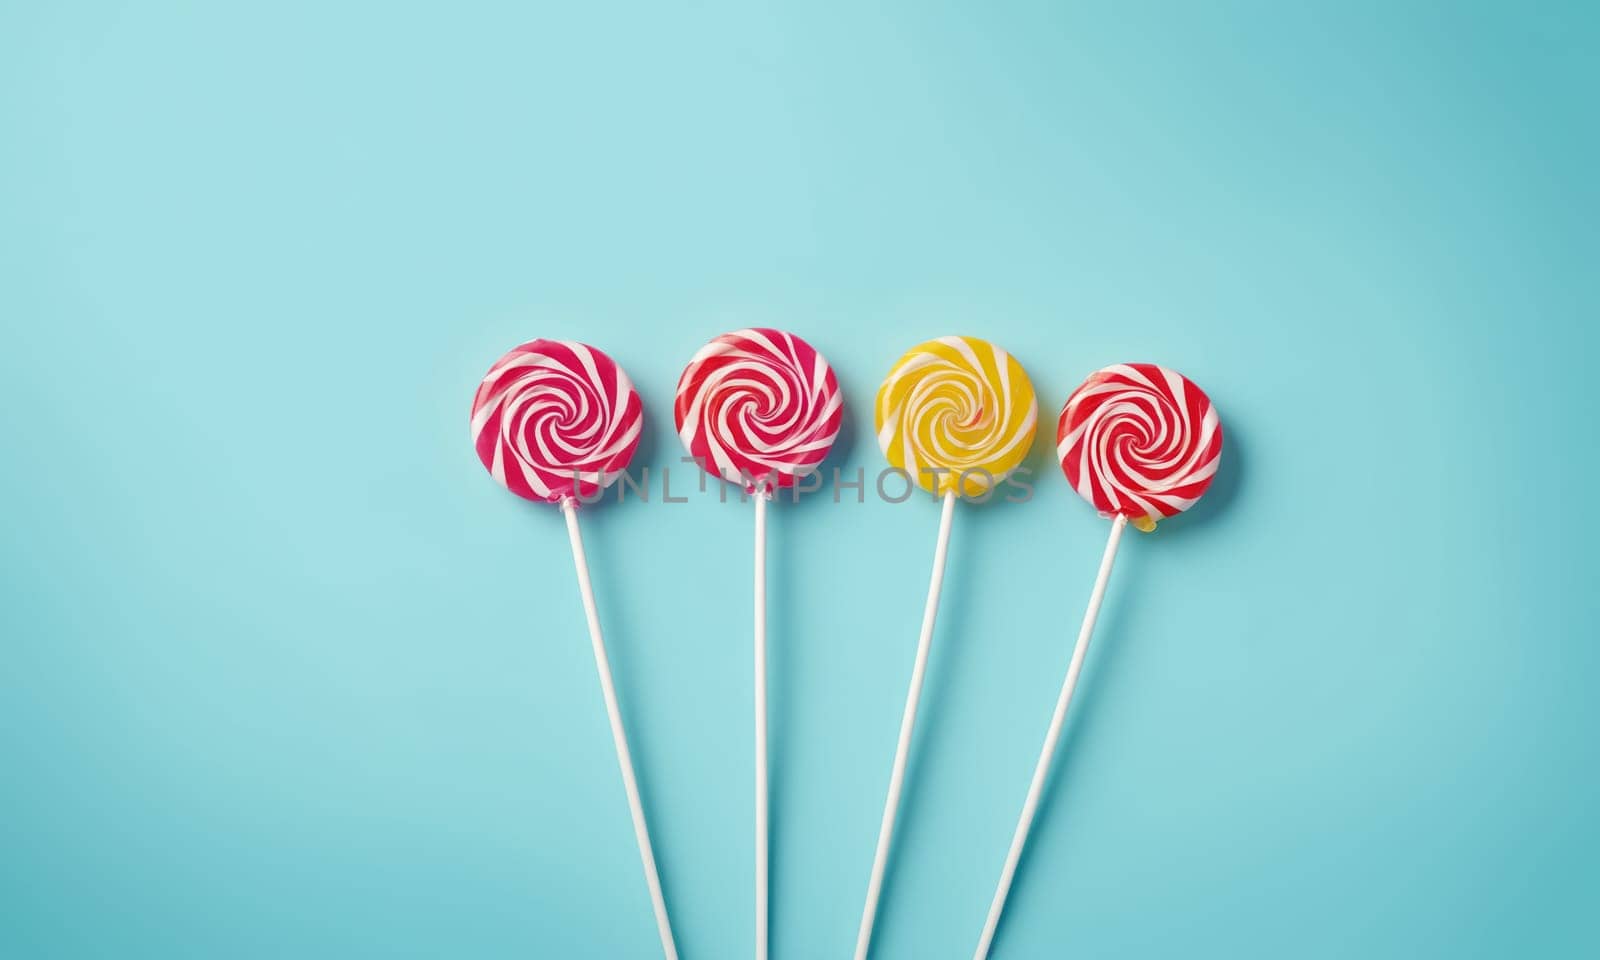 Colorful lollipops on blue background. Top view